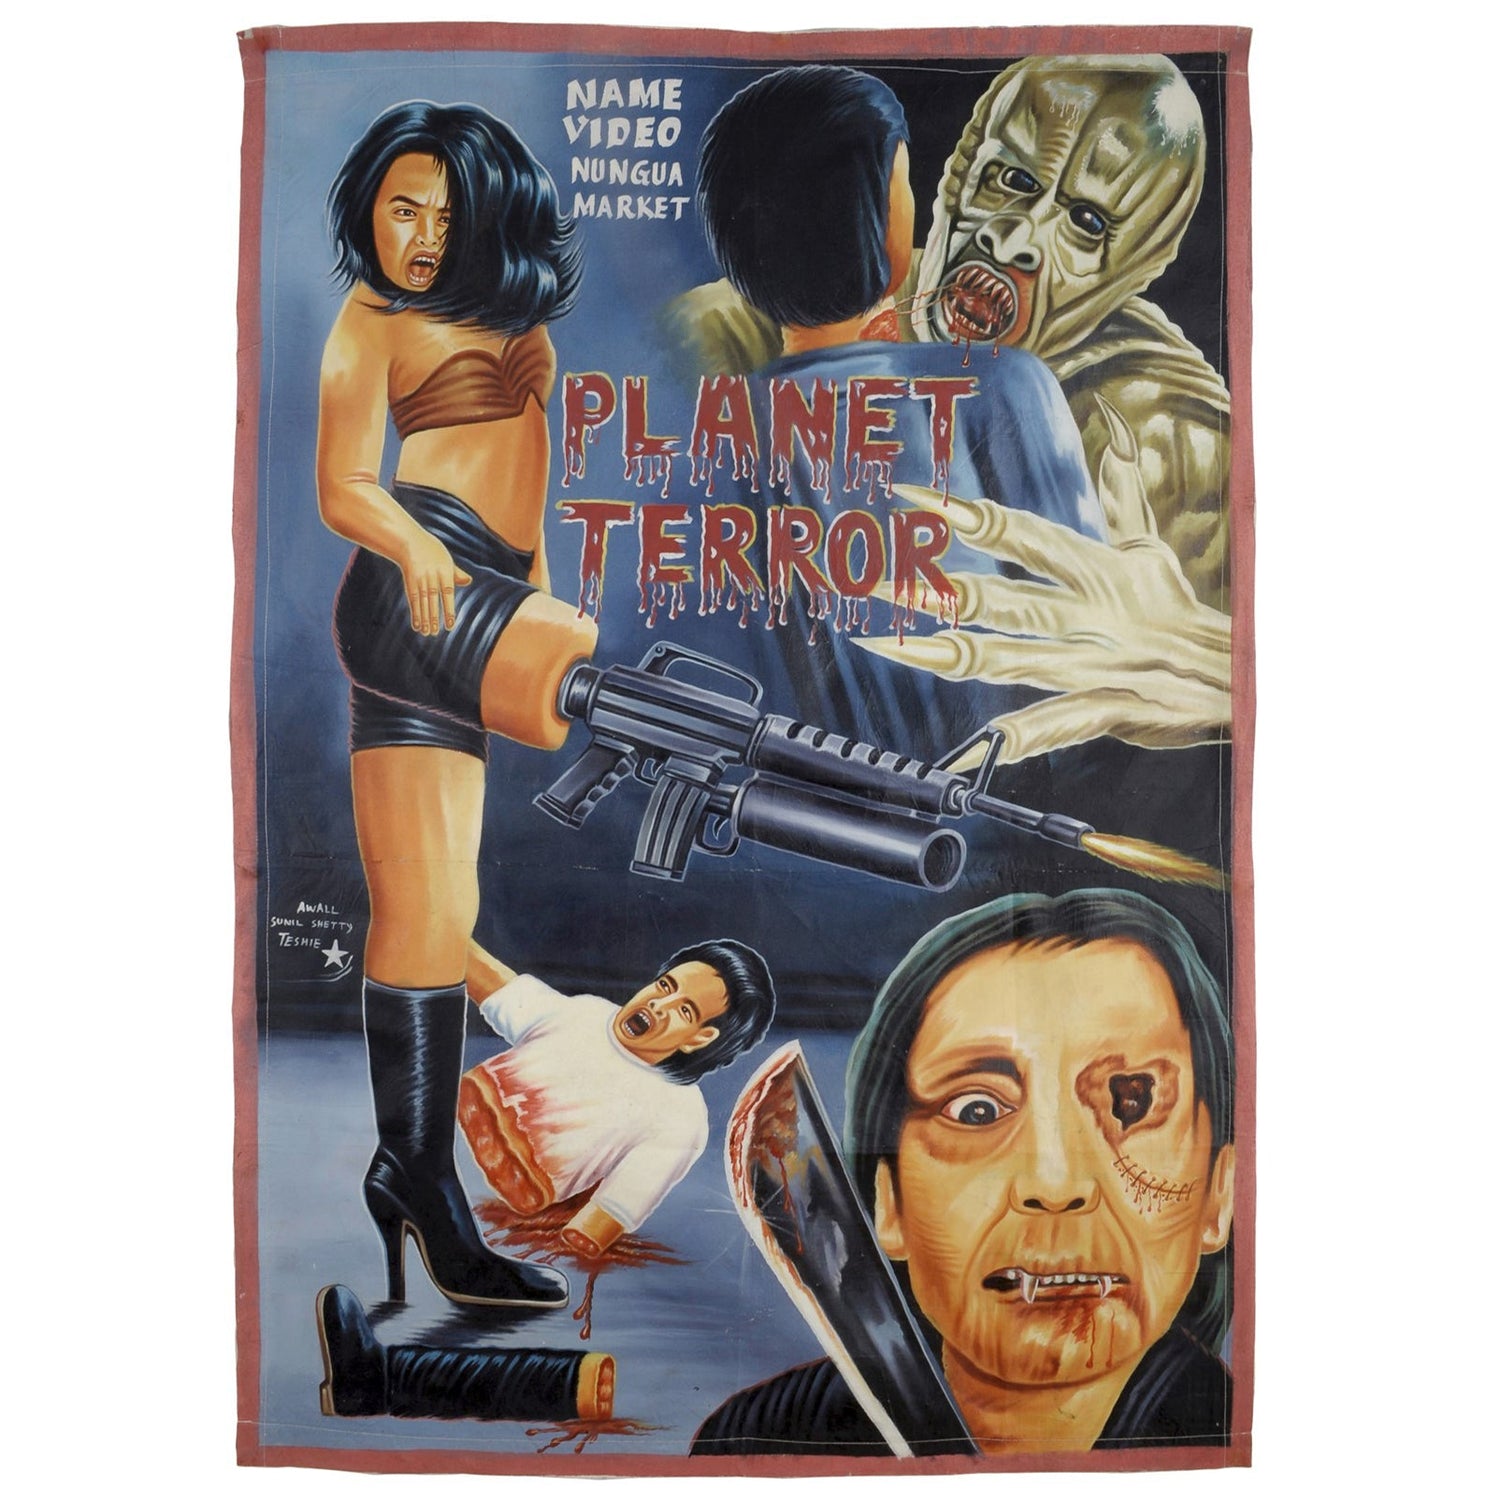 PLANET TERROR MOVIE POSTER HAND PAINTED IN GHANA FOR THE LOCAL CINEMA ART